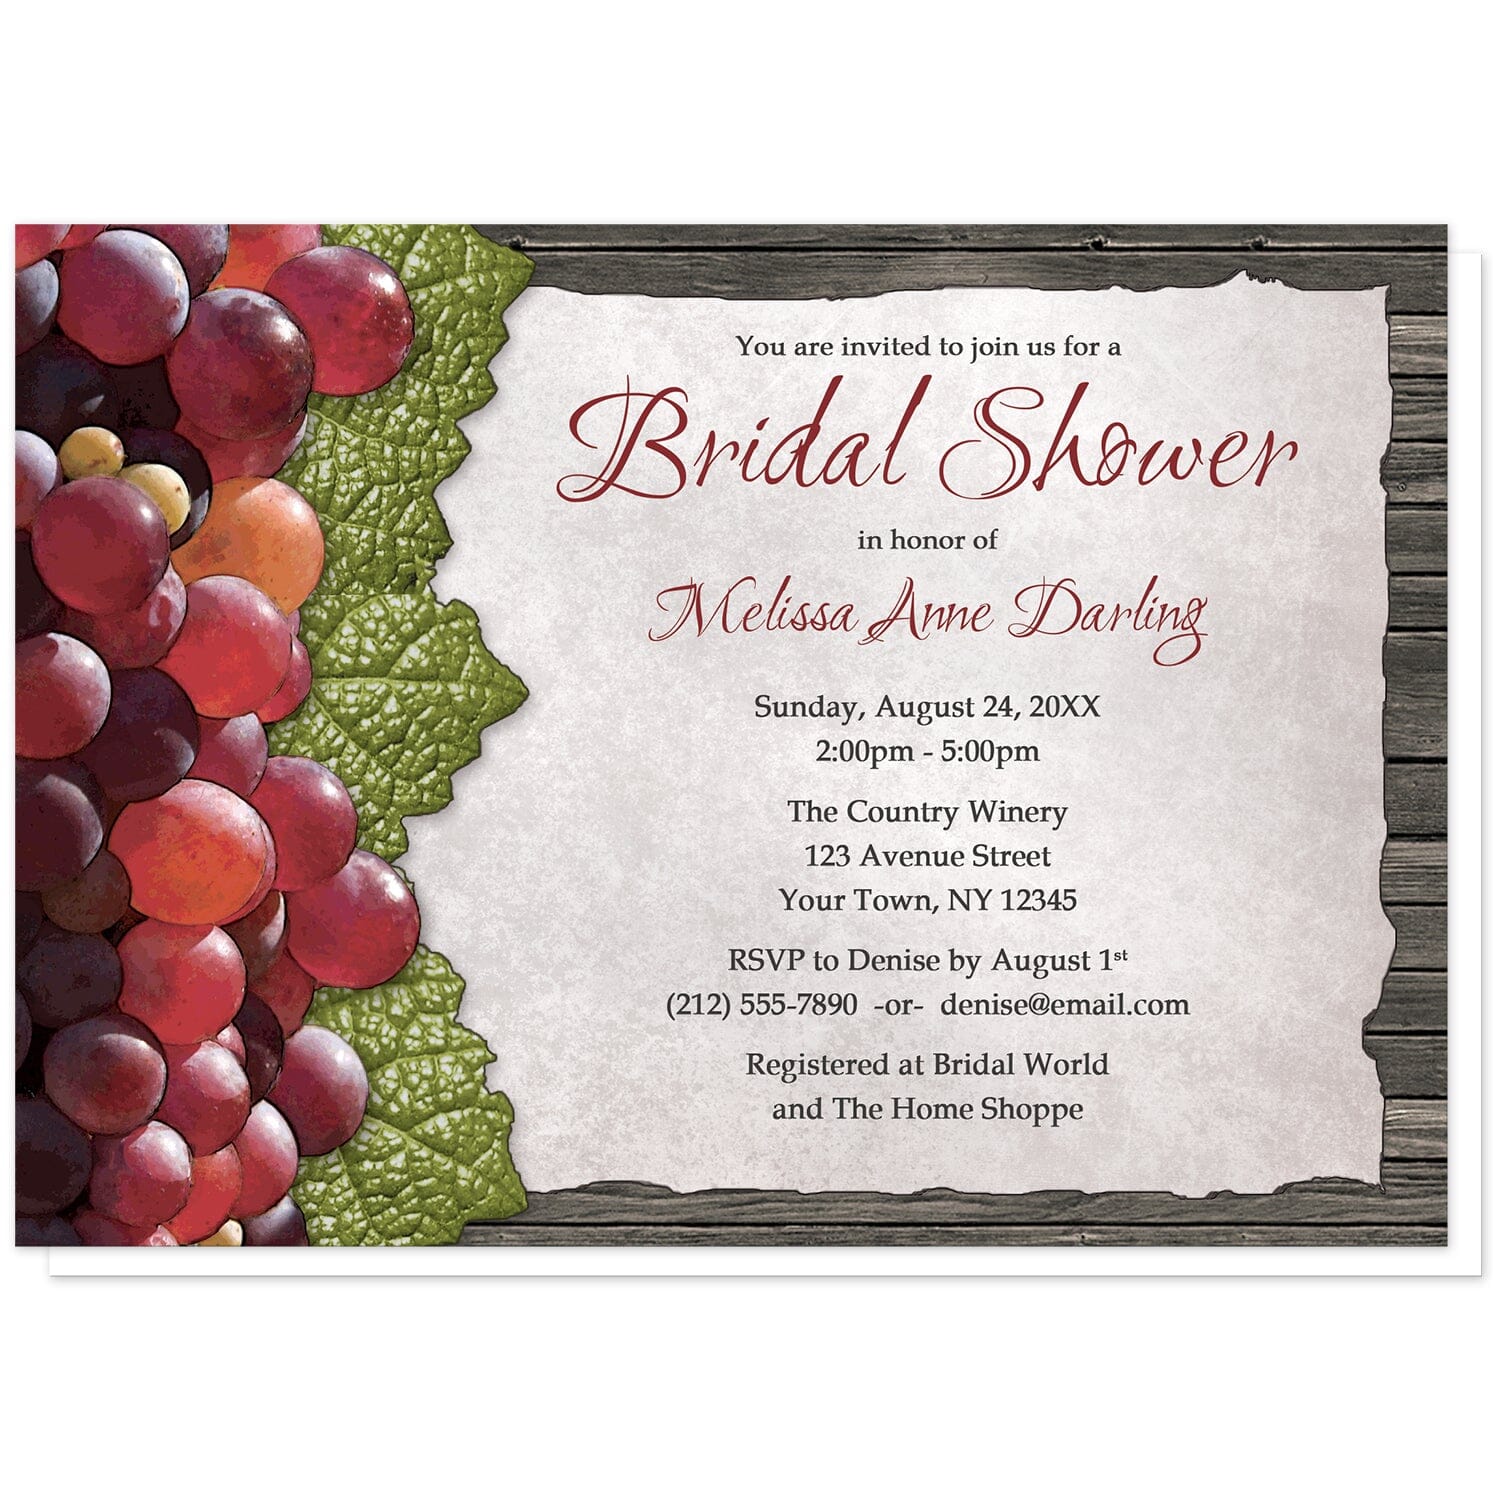 Rustic Winery Grapes and Wood Bridal Shower Invitations at Artistically Invited. Rustic winery grapes and wood bridal shower invitations designed with rustic red grapes and green leaves along the left side. Your personalized bridal shower celebration details are custom printed in dark red and brown on a torn parchment paper design over dark brown wood. 